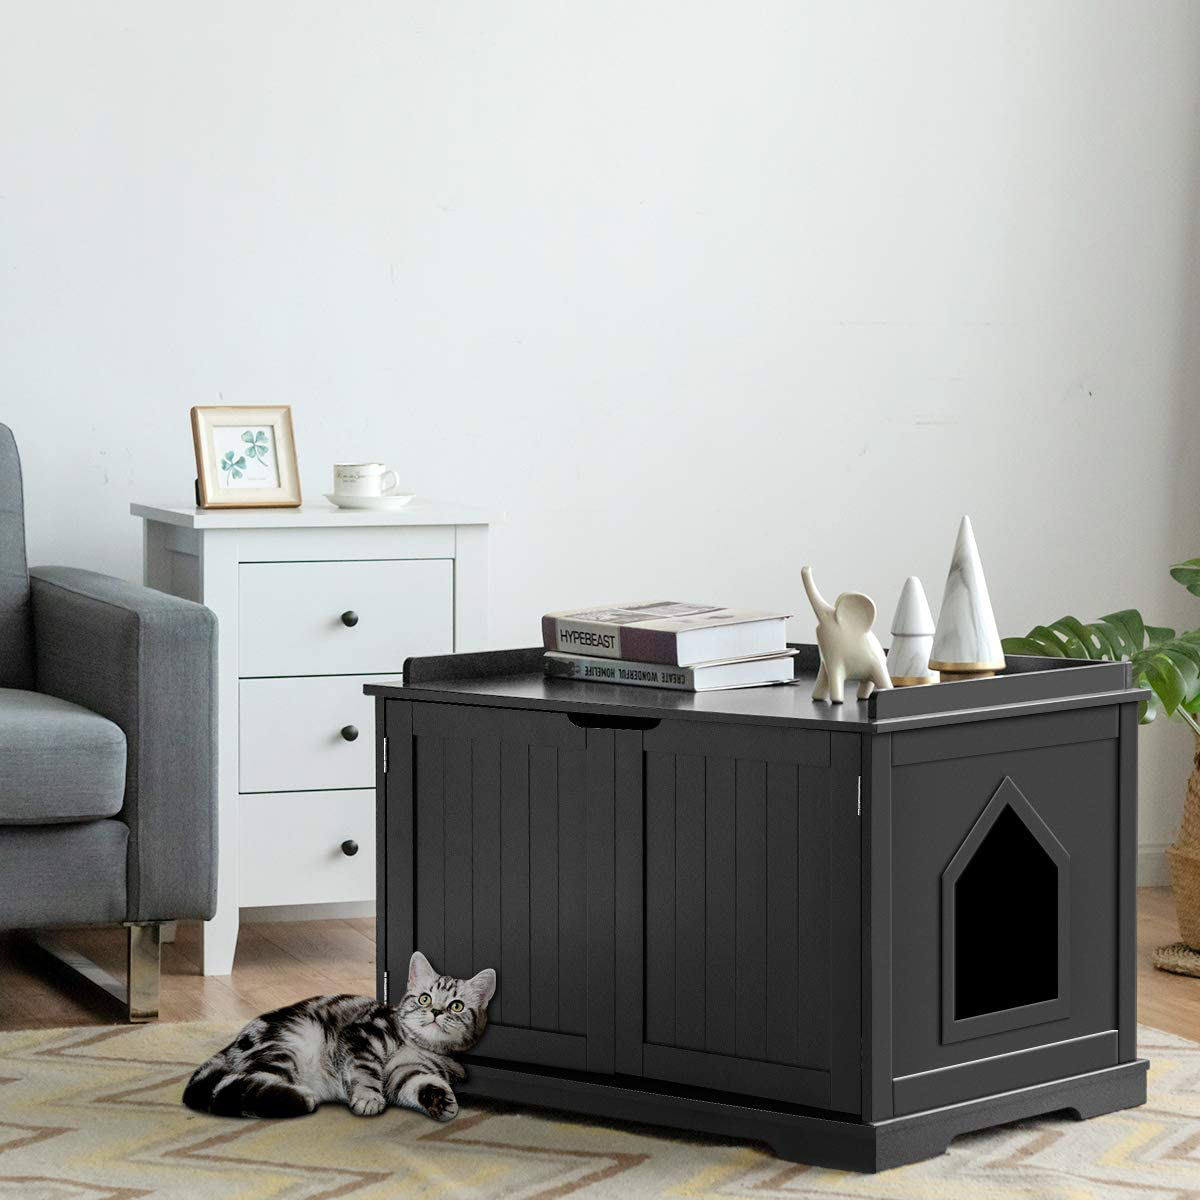 Tangkula Litter Box Enclosure, Cat Litter Box Furniture Hidden, Nightstand Pet House with Double Doors, Indoor Decorative Cat House, Cat Washroom Storage Bench for Large Cat Kitty Animals & Pet Supplies > Pet Supplies > Cat Supplies > Cat Furniture Tangkula   